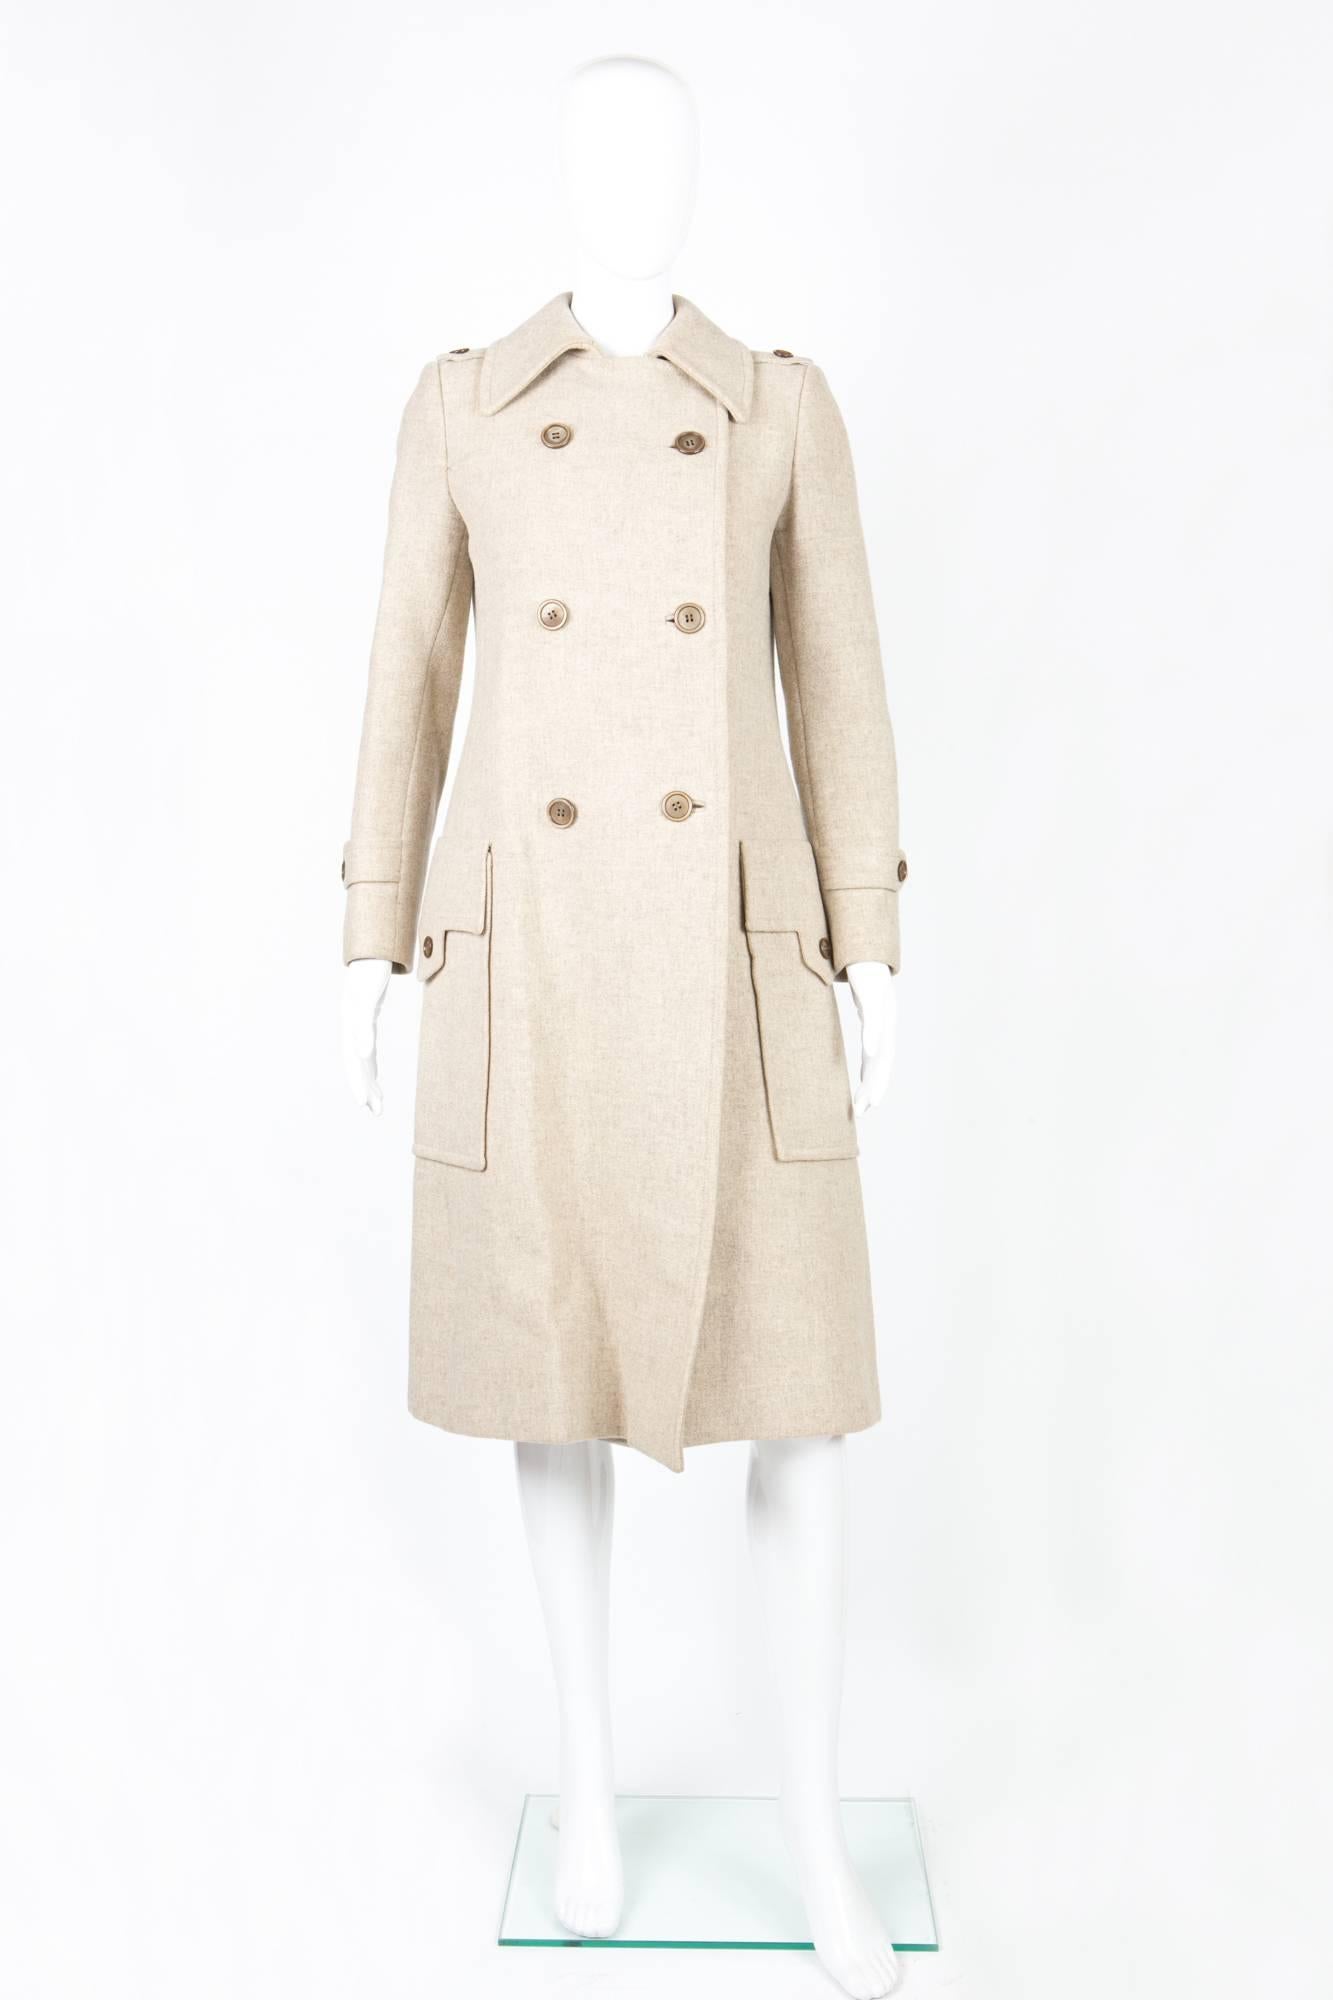 1960s Ted Lapidus ivory wool coat featuring a double breast opening, large patched pockets with side enter, shoulder straps, center back slit.
 In good vintage condition. Made in France.
Chest 36,2 in. ( 92 cm)
Waist 35,4 in. ( 90 cm)
Length